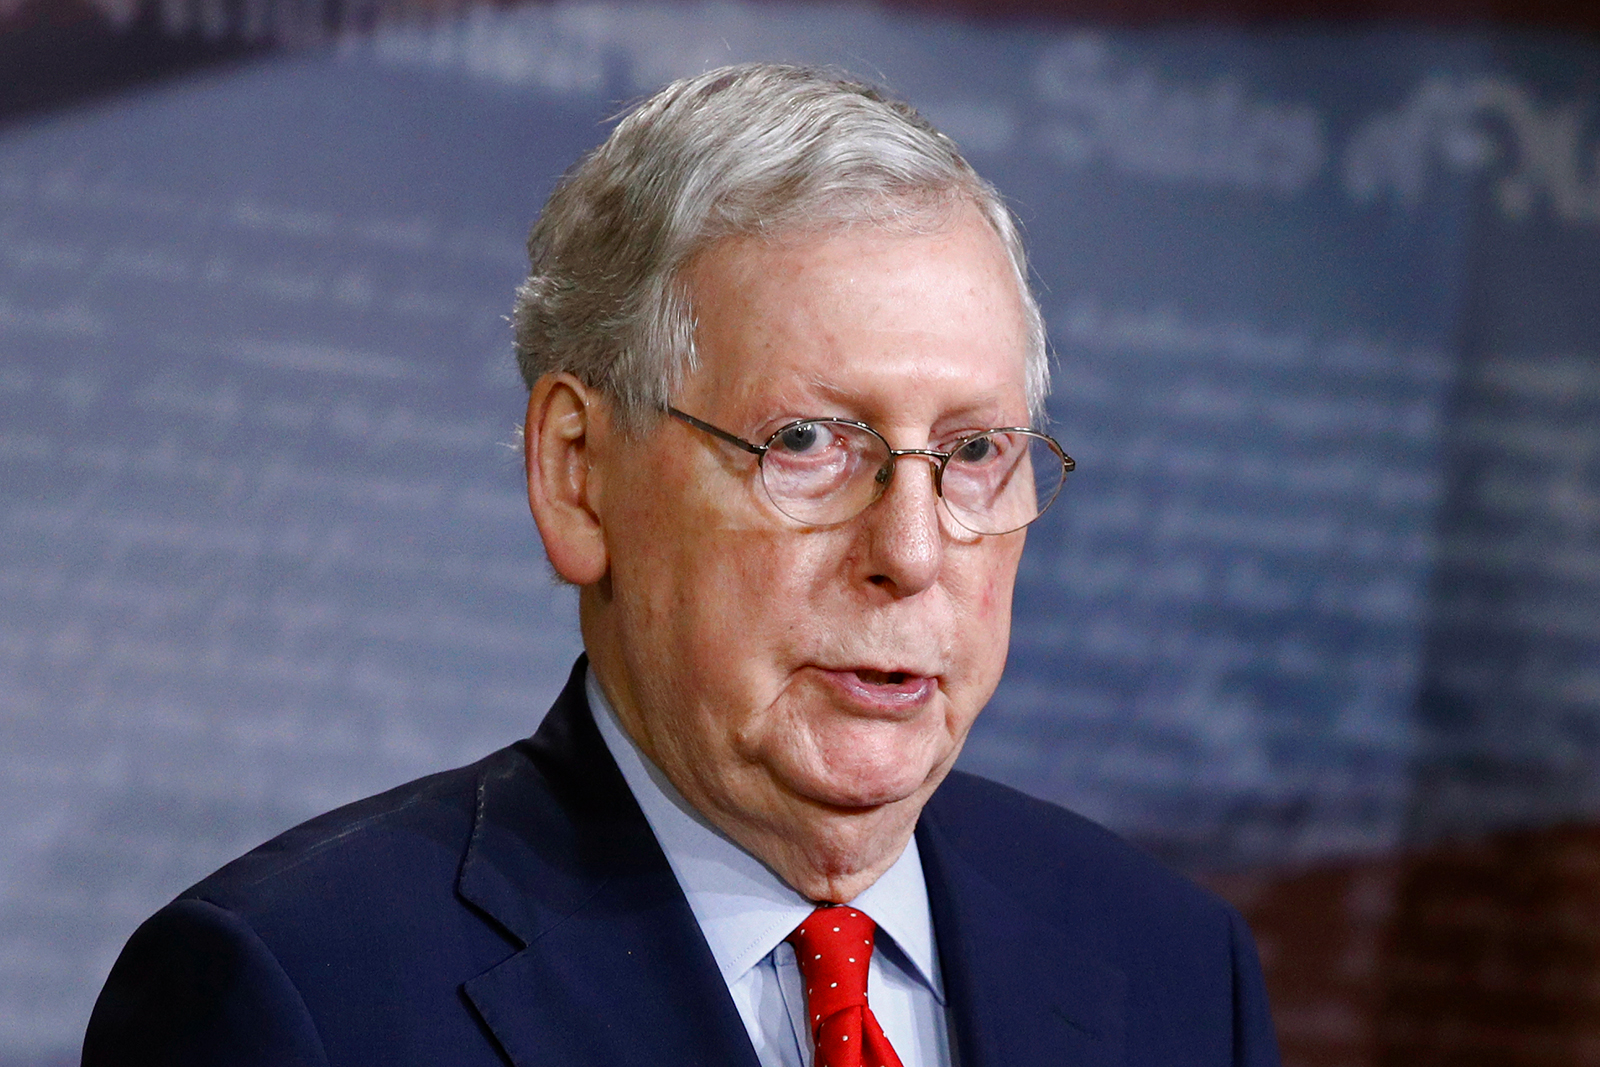 Senate Majority Leader Mitch McConnell speaks with reporters on April 21, at Capitol Hill in Washington DC.